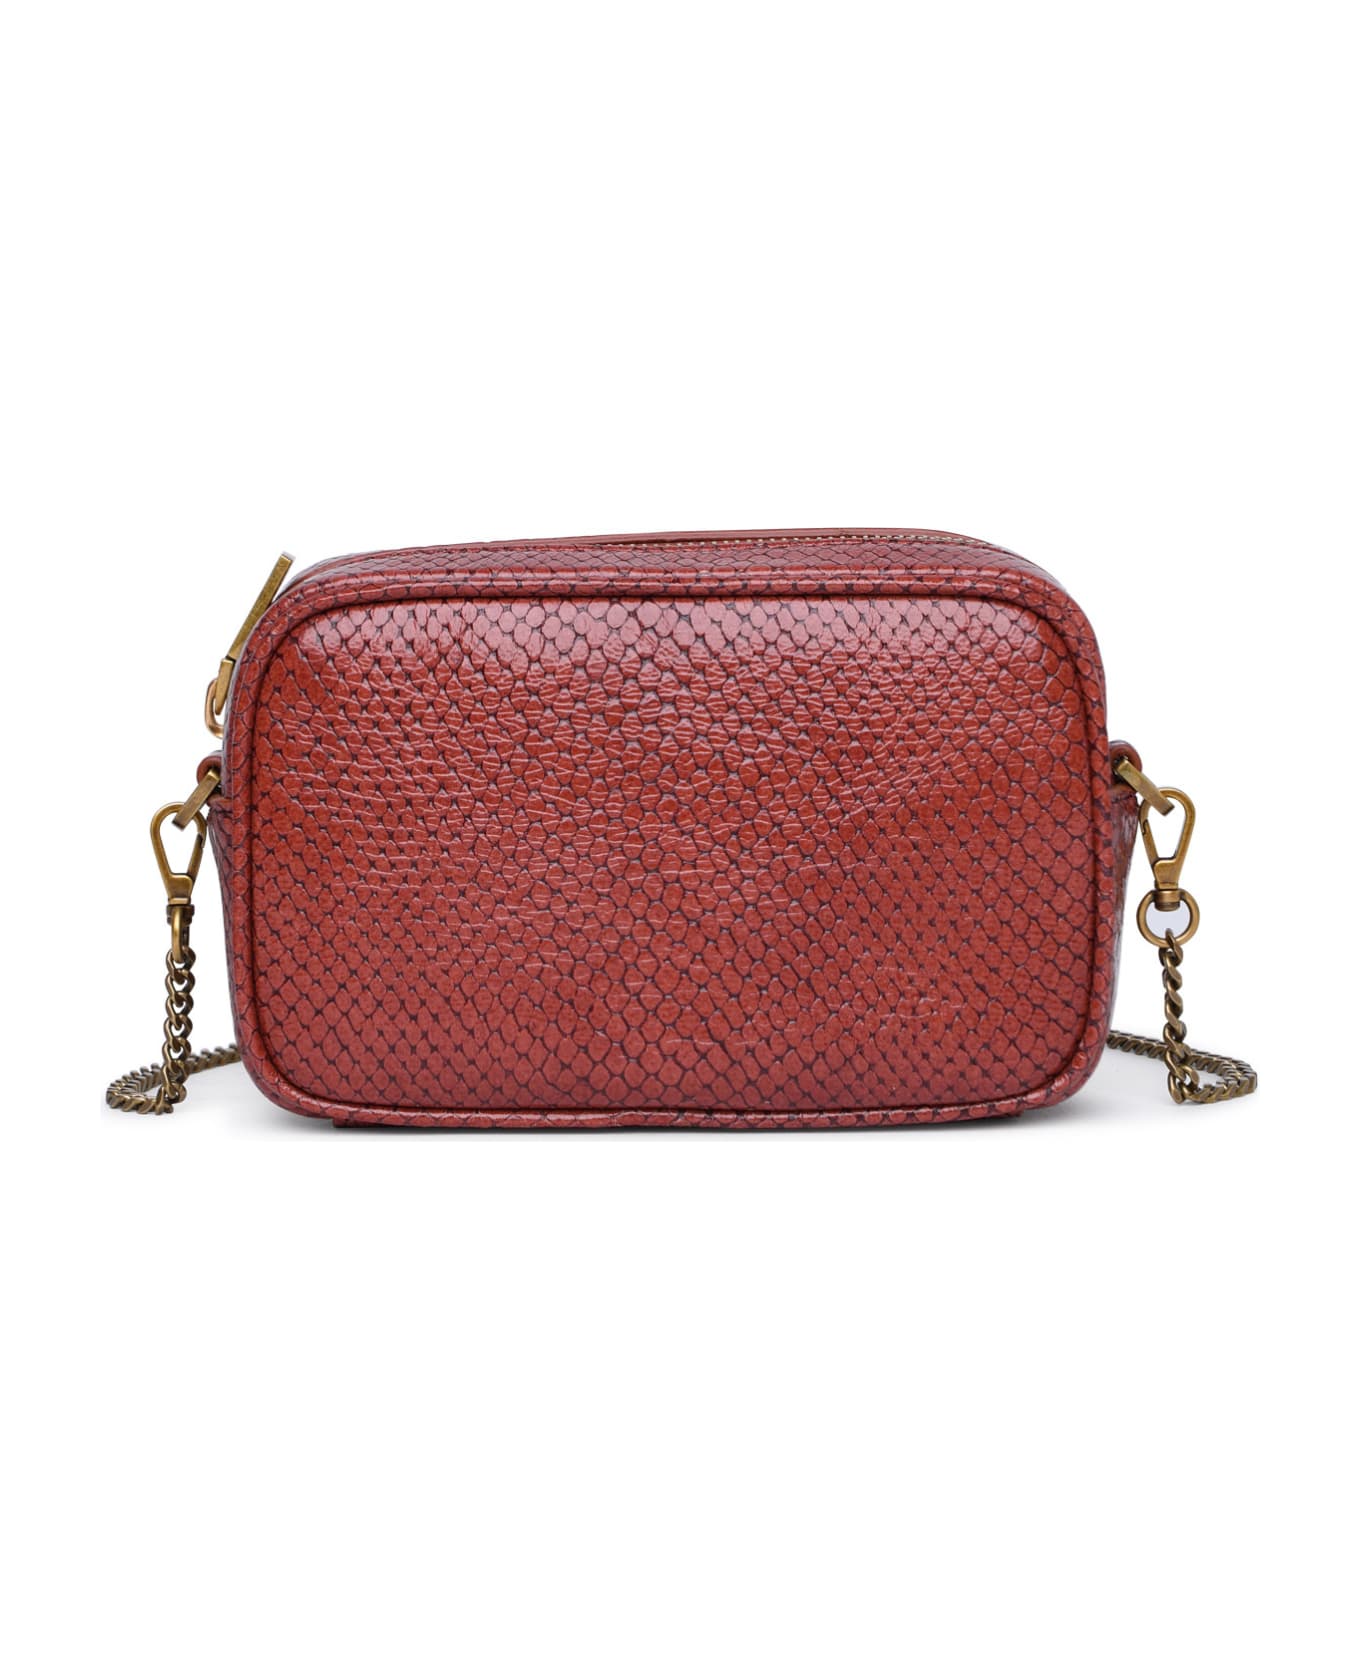 Golden Goose 'star' Mini Bag In Brown Leather - Red ショルダーバッグ